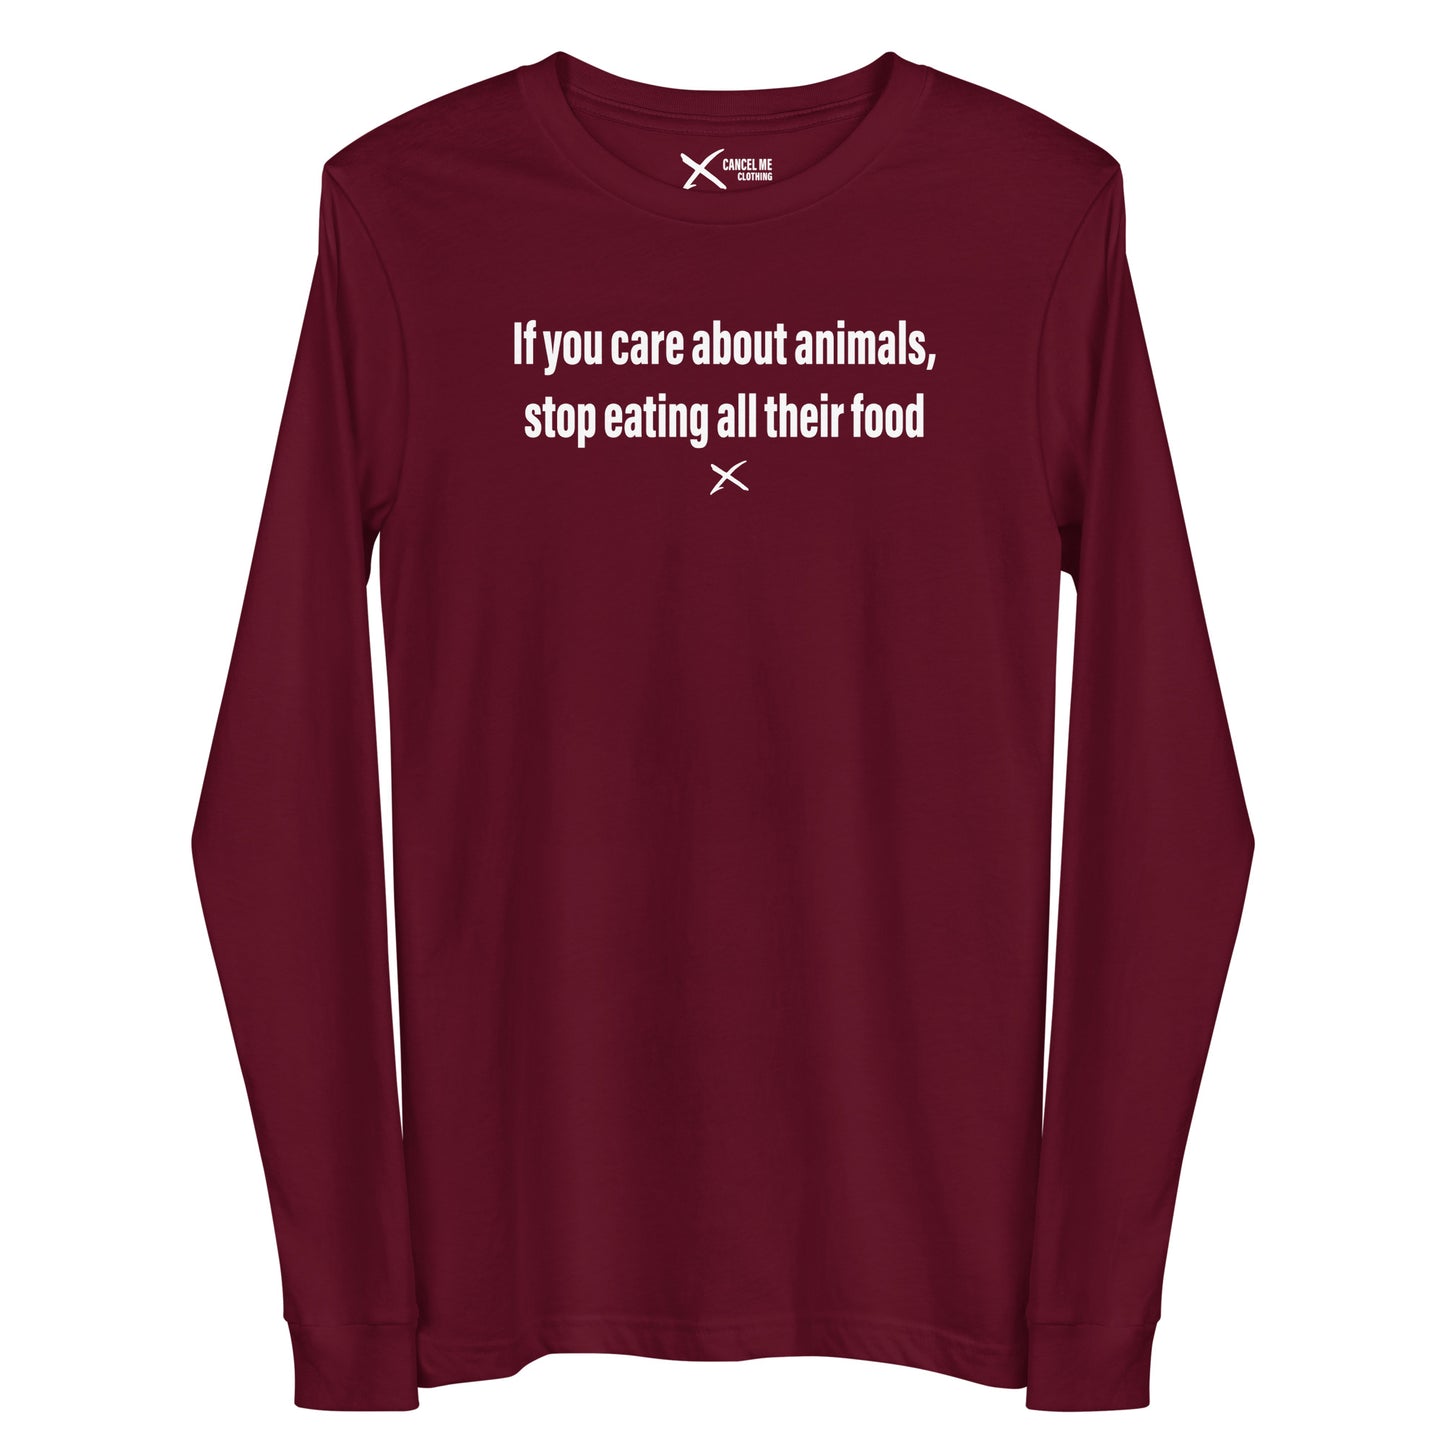 If you care about animals, stop eating all their food - Longsleeve